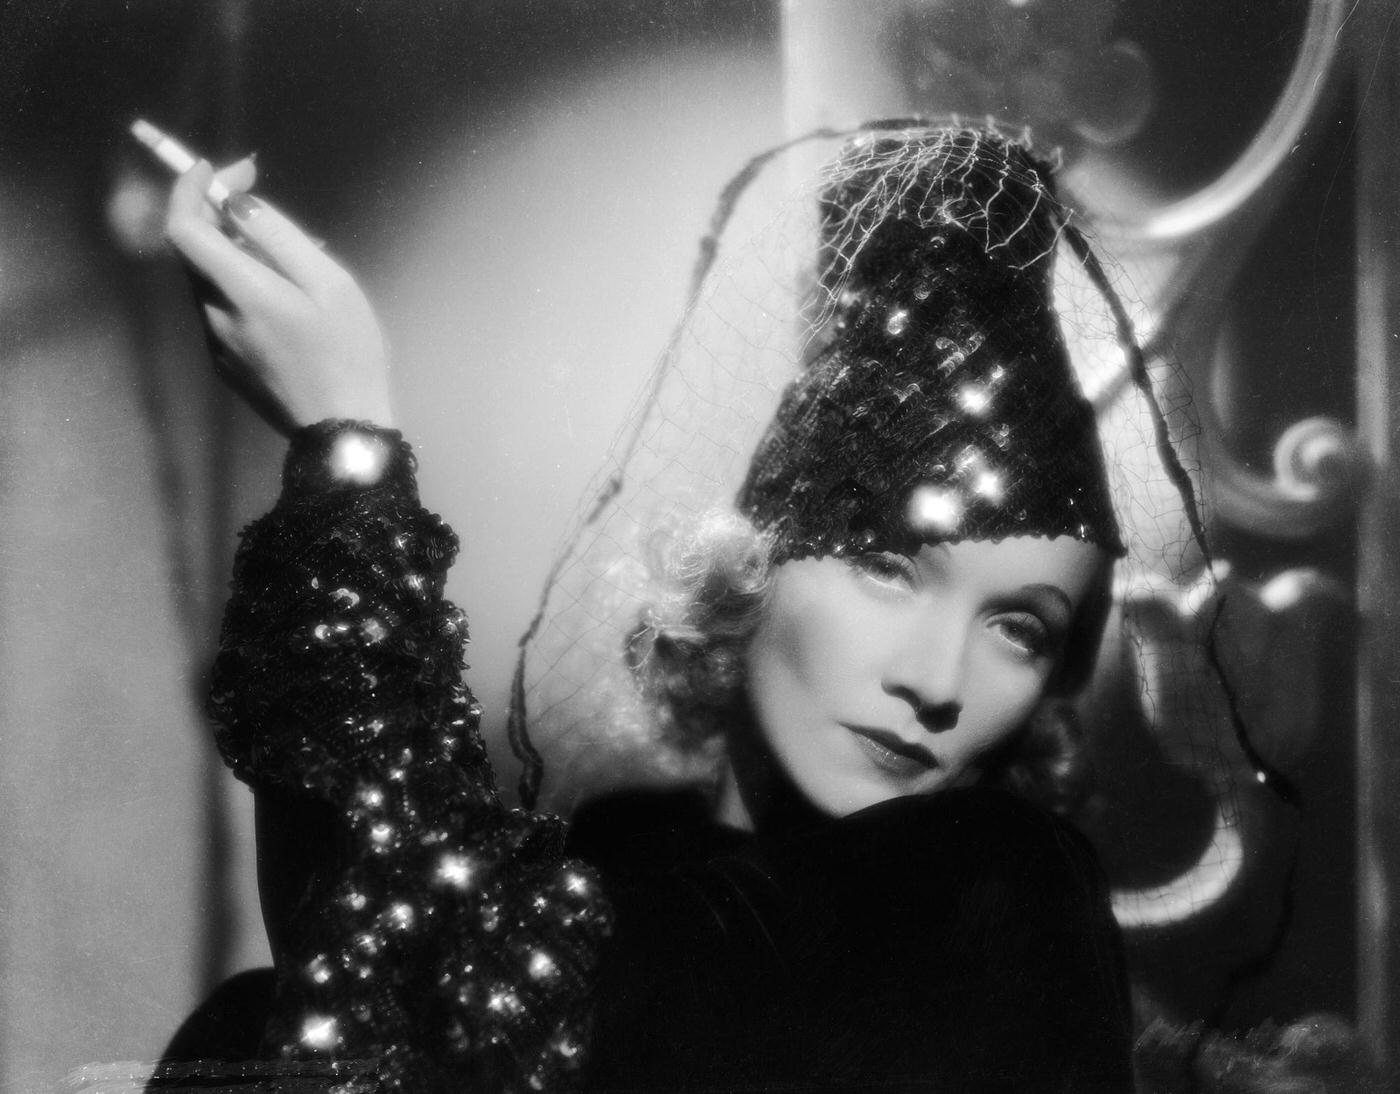 The film 'Angel' features Marlene Dietrich in a starring role as Maria Barker.